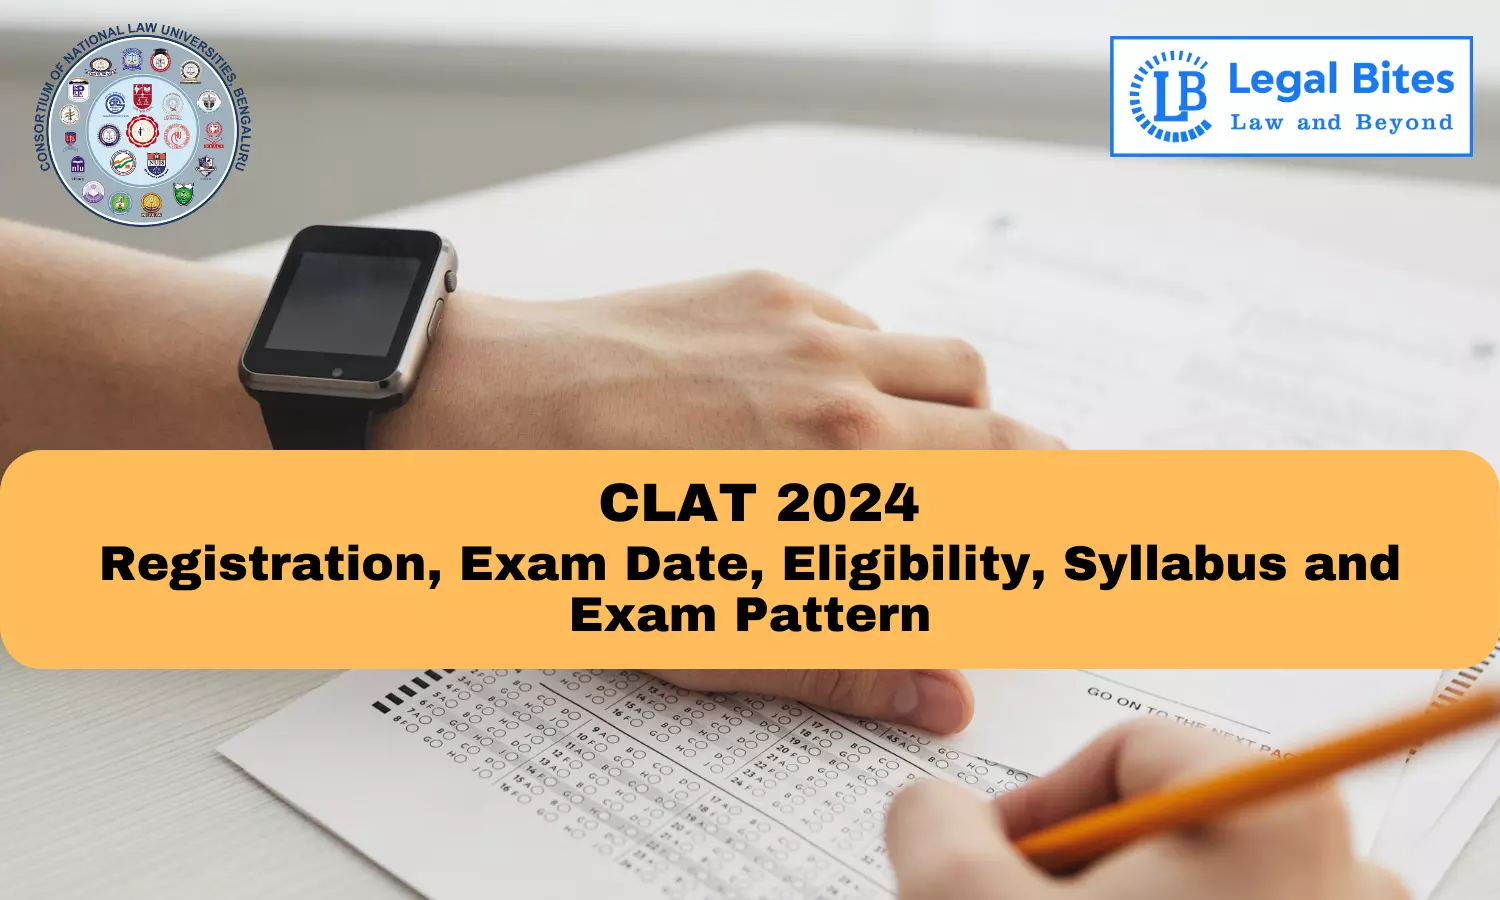 CLAT 2024: Registration, Exam Date, Eligibility, Syllabus and Exam Pattern